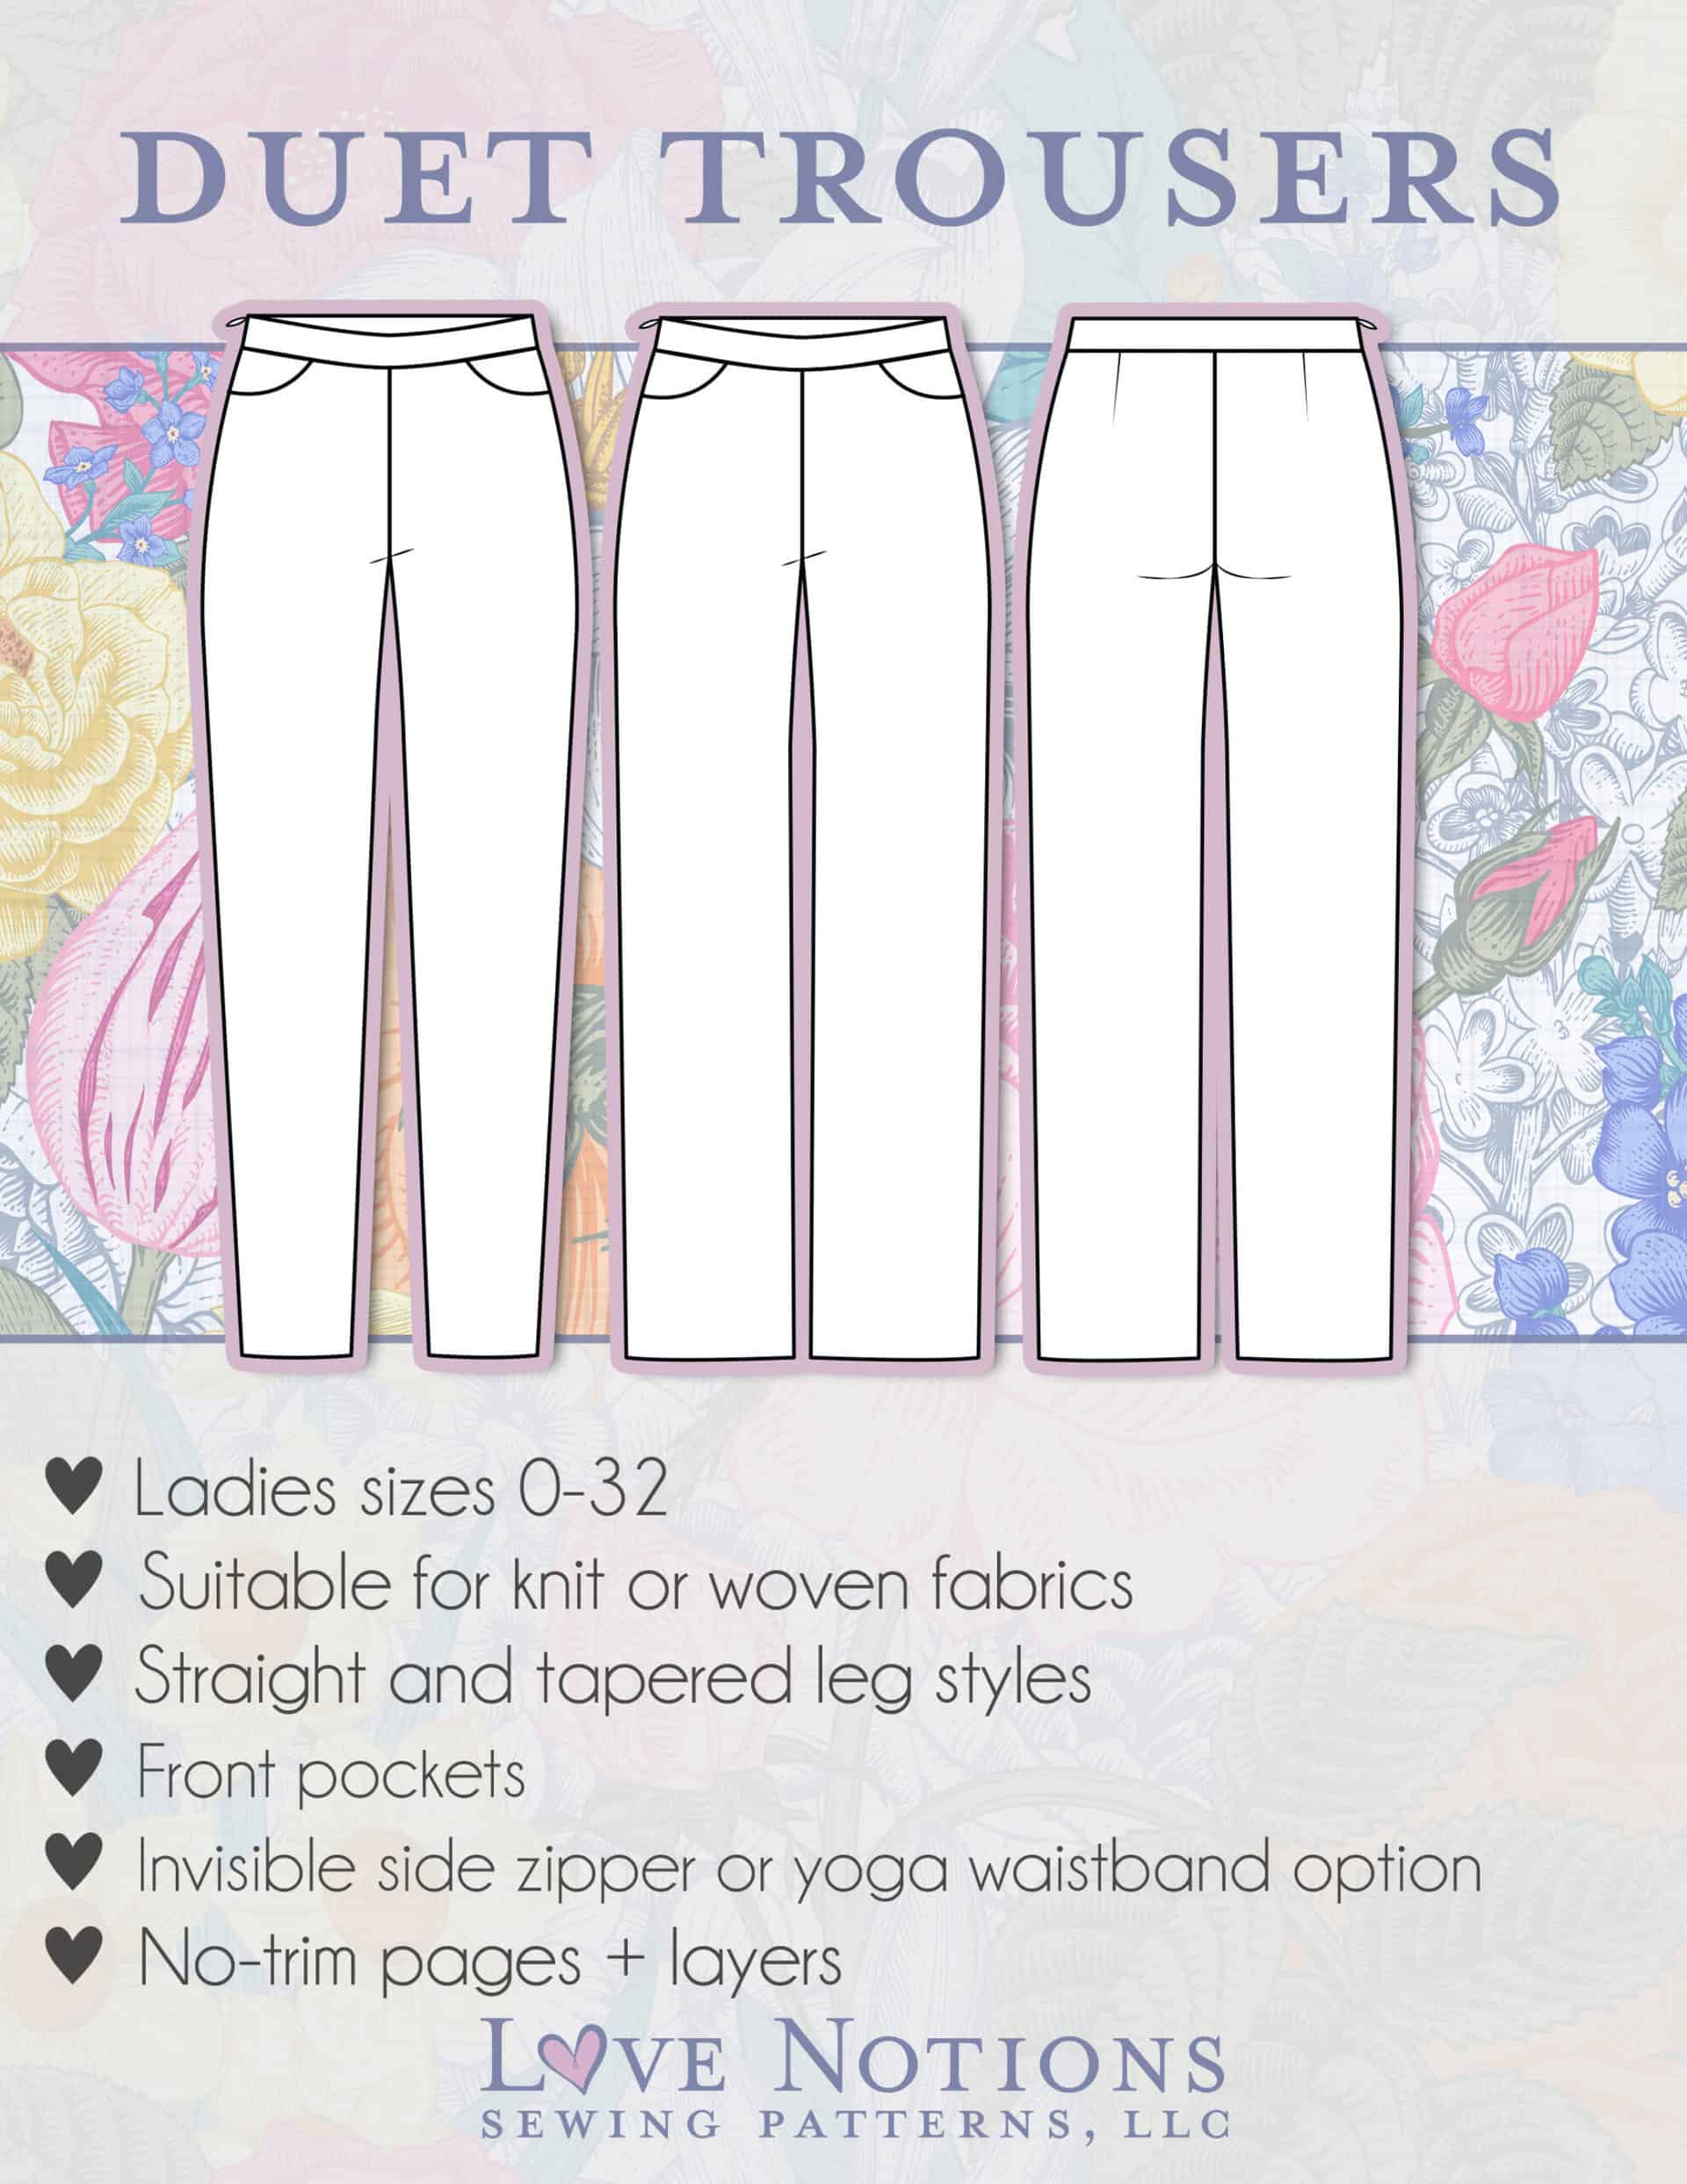 How to Cut and Sew Trousers for Ladies